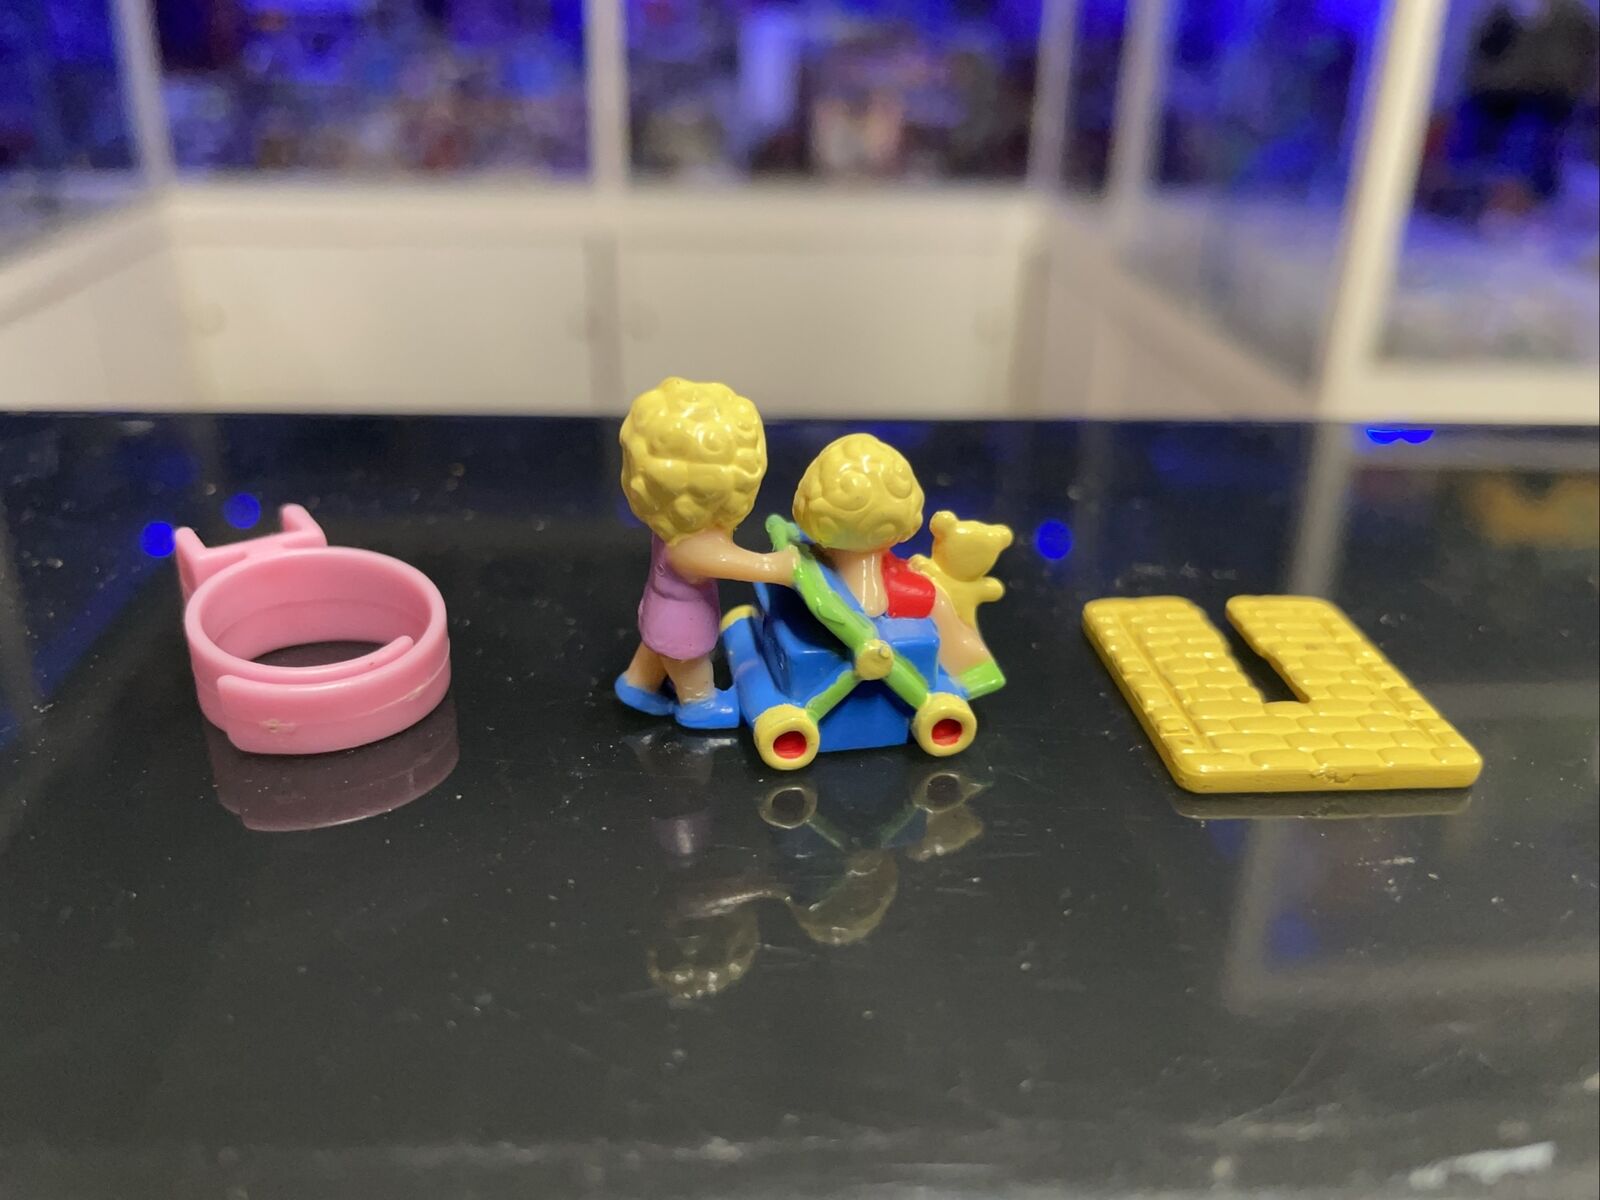 Polly-Pocket-Vintage-Anello-Bluebird-Pram-and-Baby-Ring-1990-completo-134435757507-2